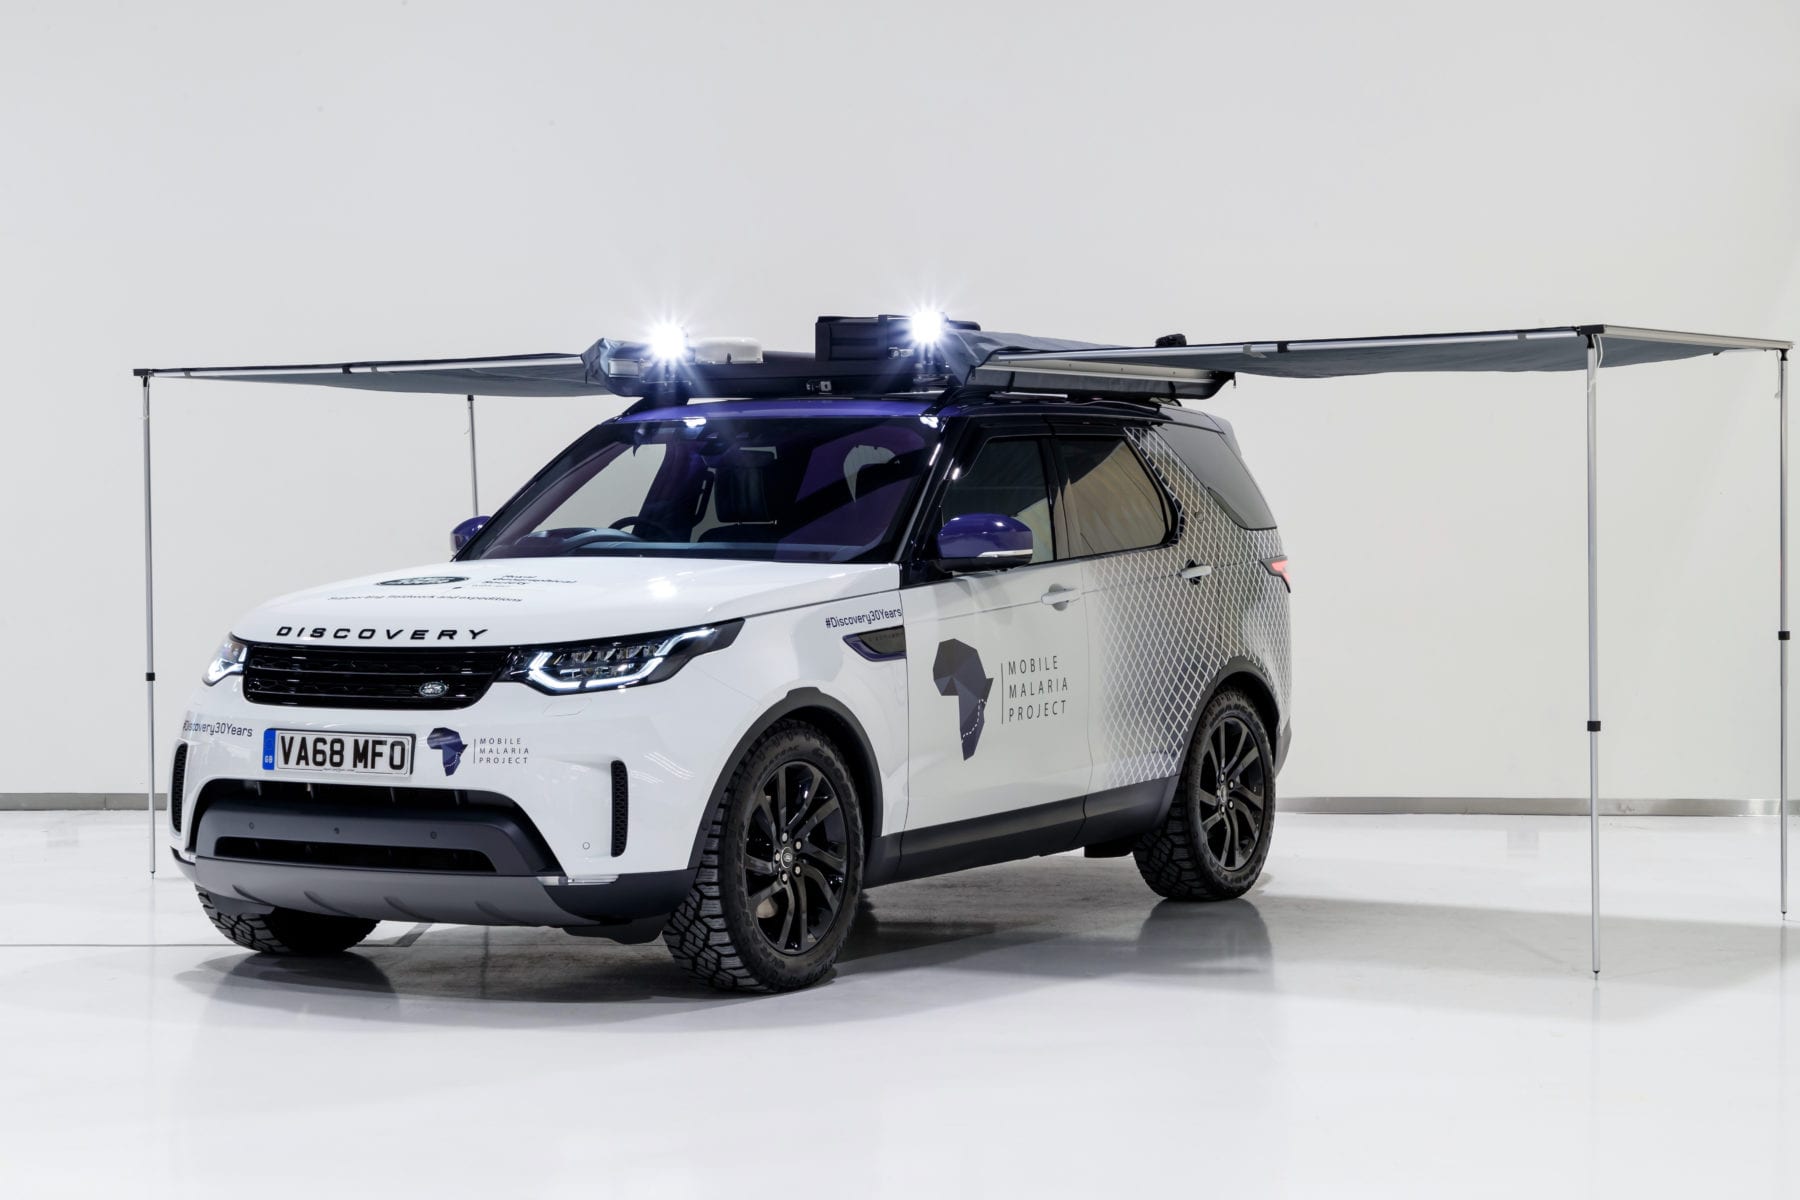 Land Rover Discovery Mobile Malaria Project